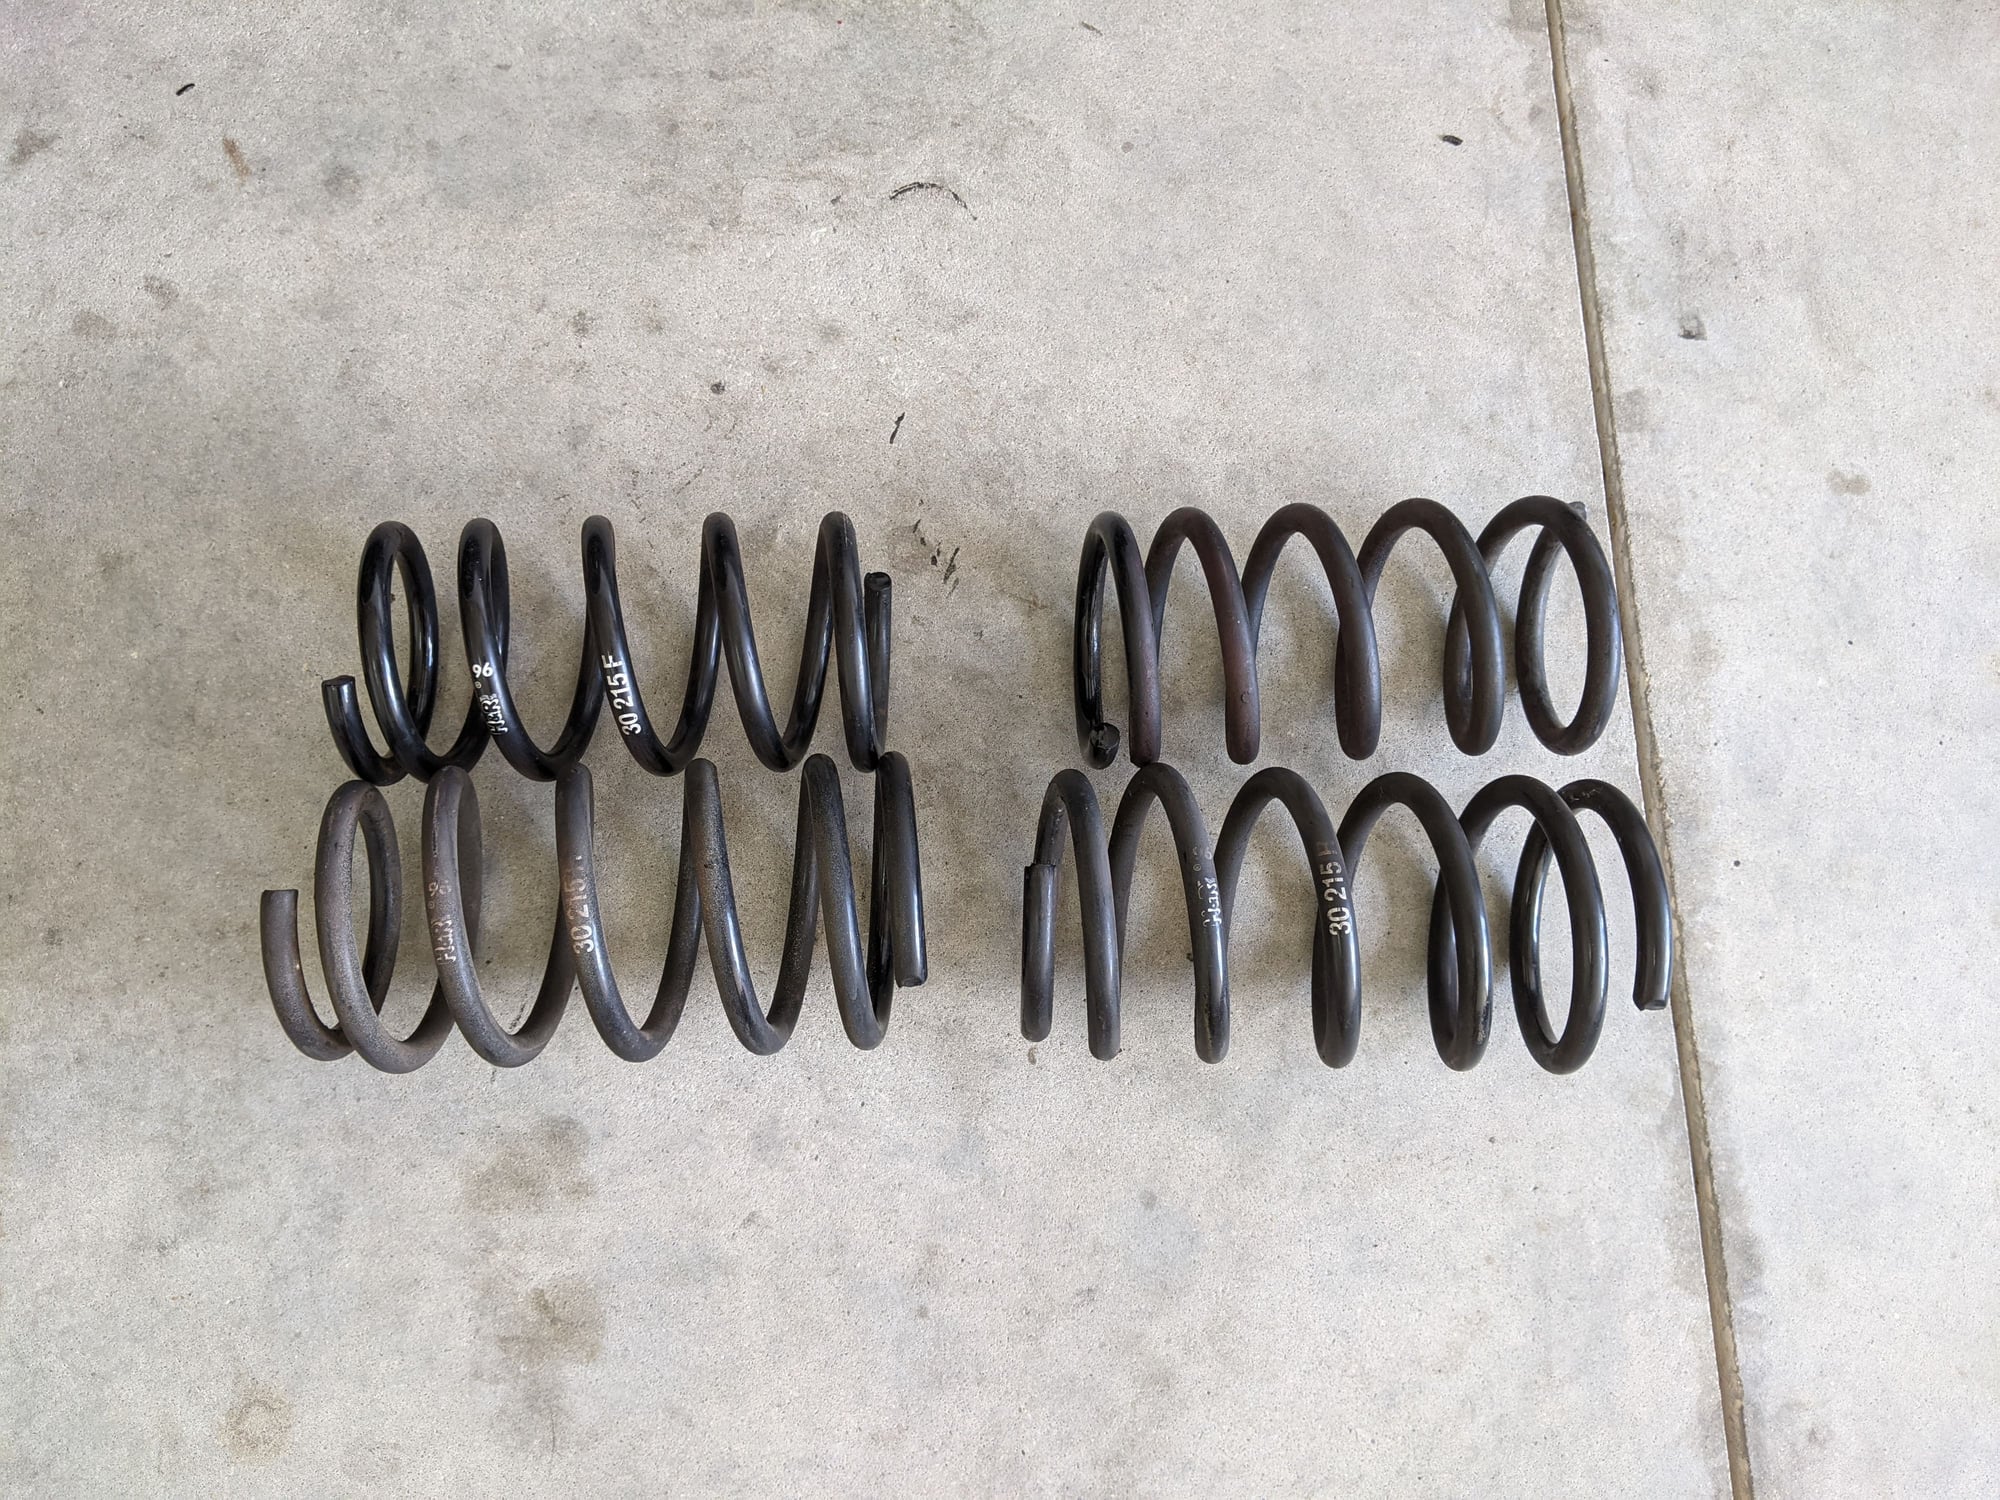 Steering/Suspension - Koni Shocks and H&R Springs - Used - 1993 to 1995 Mazda RX-7 - Melbourne, FL 32940, United States